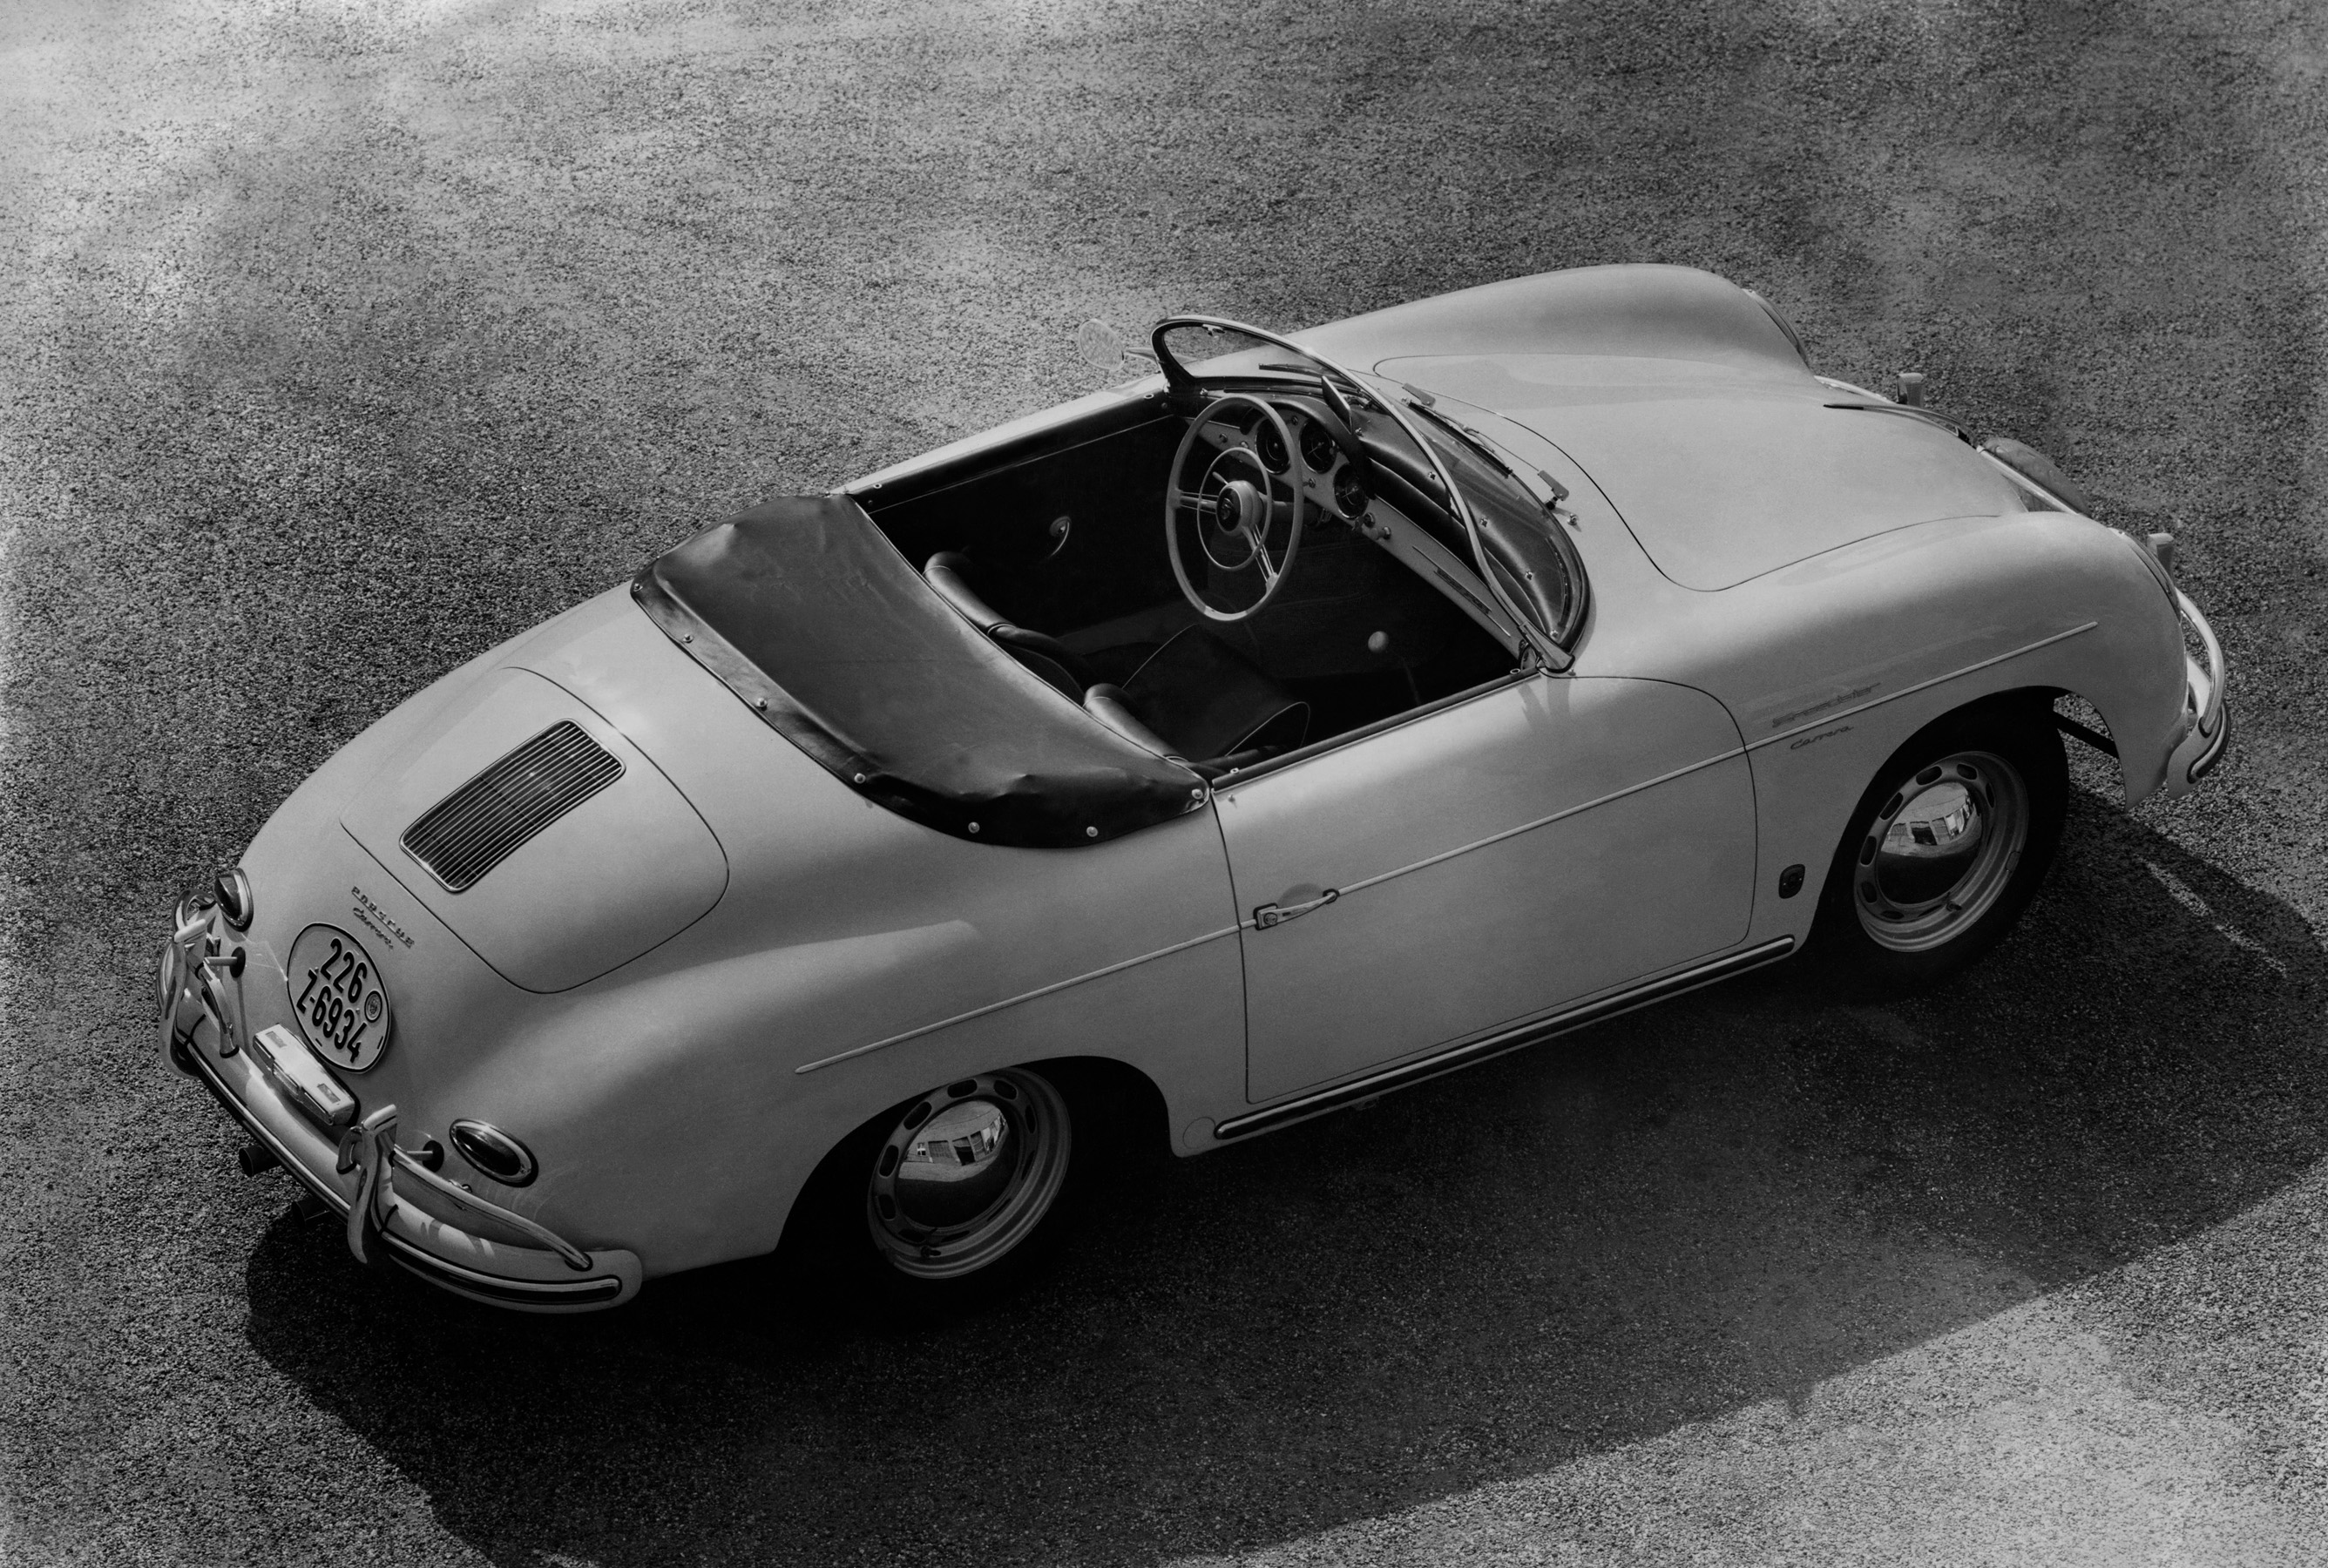 Porsche introduced the Typ 540 Speedster in 1954, carrying over the designation from the earlier America Roadster. This 1958 Carrera presented buyers the best combination of a lightweight and high-performance car. Porsche Archiv